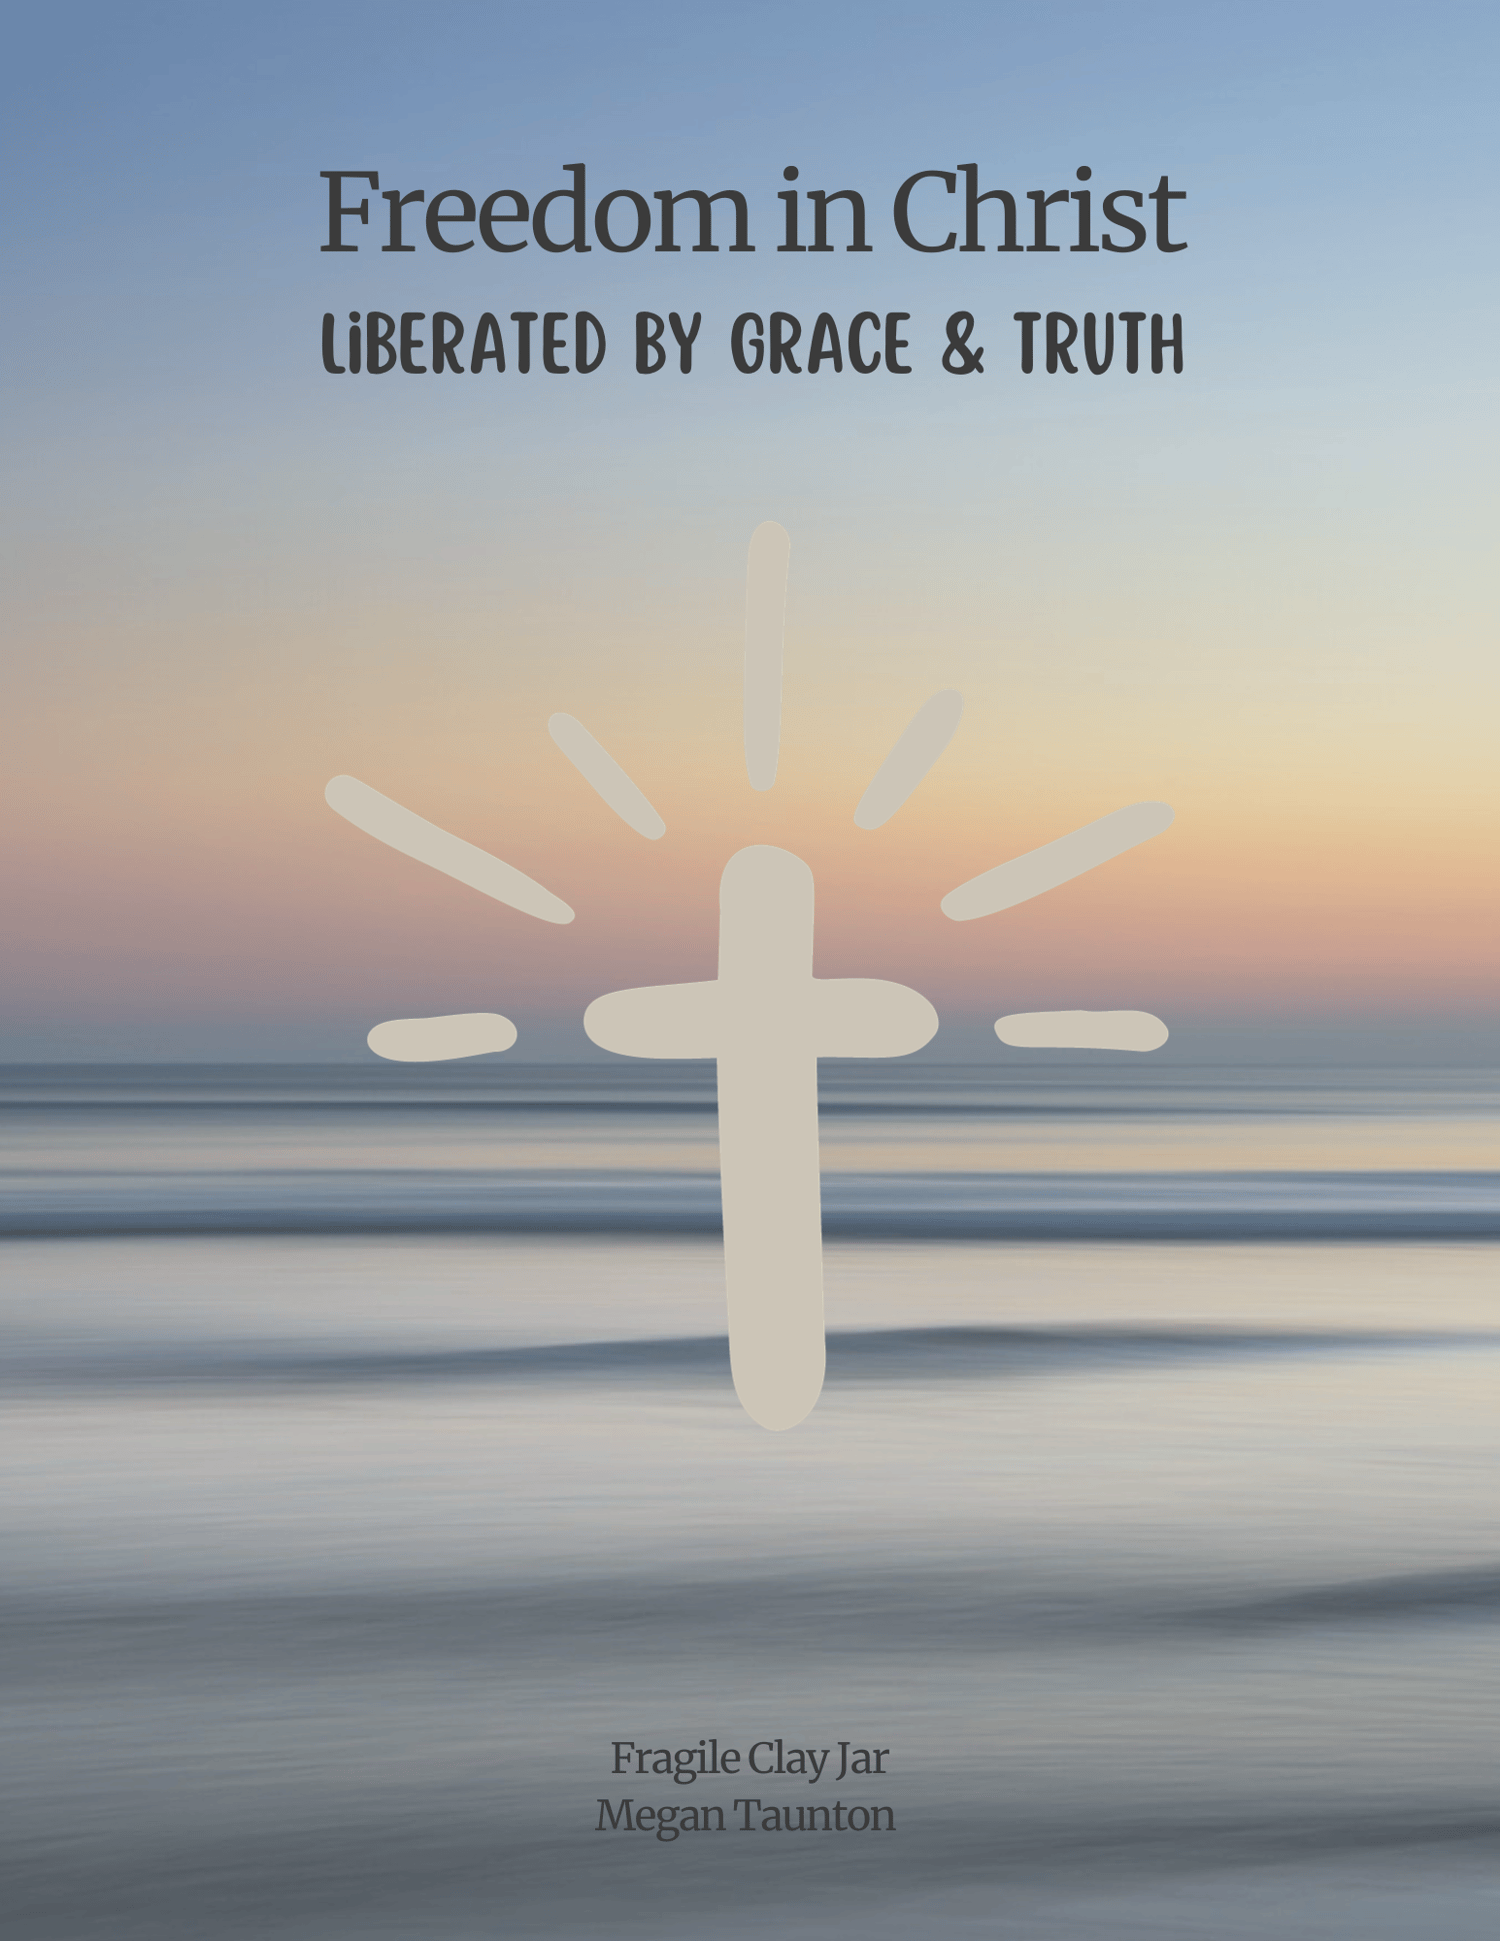 Freedom in Christ: Liberated by Grace & Truth